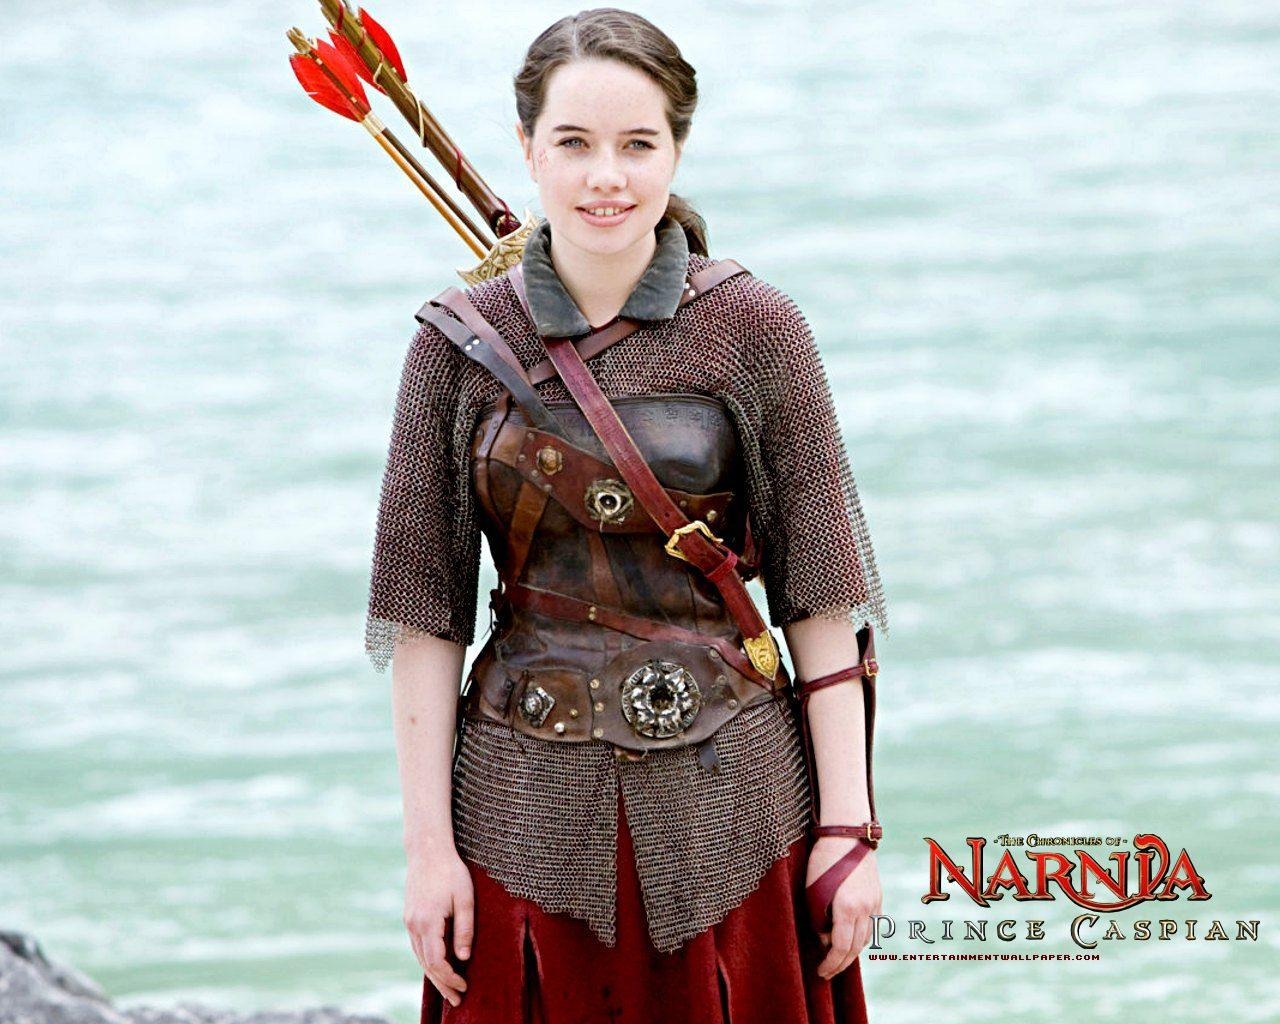 The Chronicles of Narnia 2: Prince Caspian #7 - 1280x1024